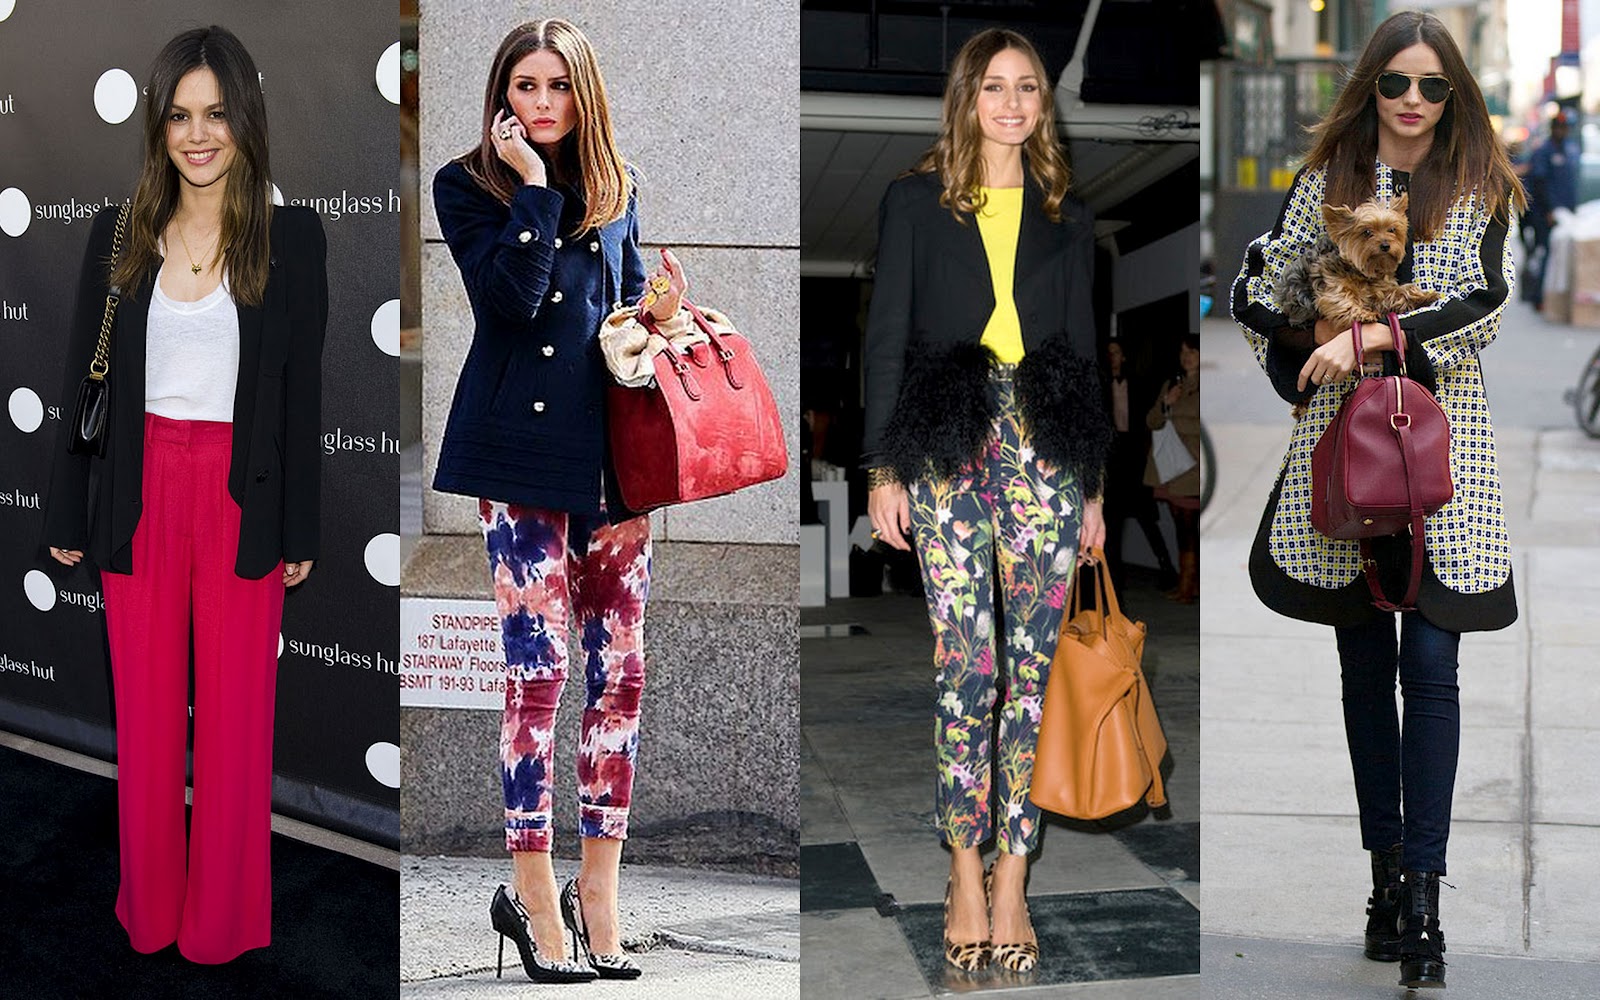 WHAT SHE WORE: Olivia Palermo in Paris with tan ONE by Meli Melo Thela bag